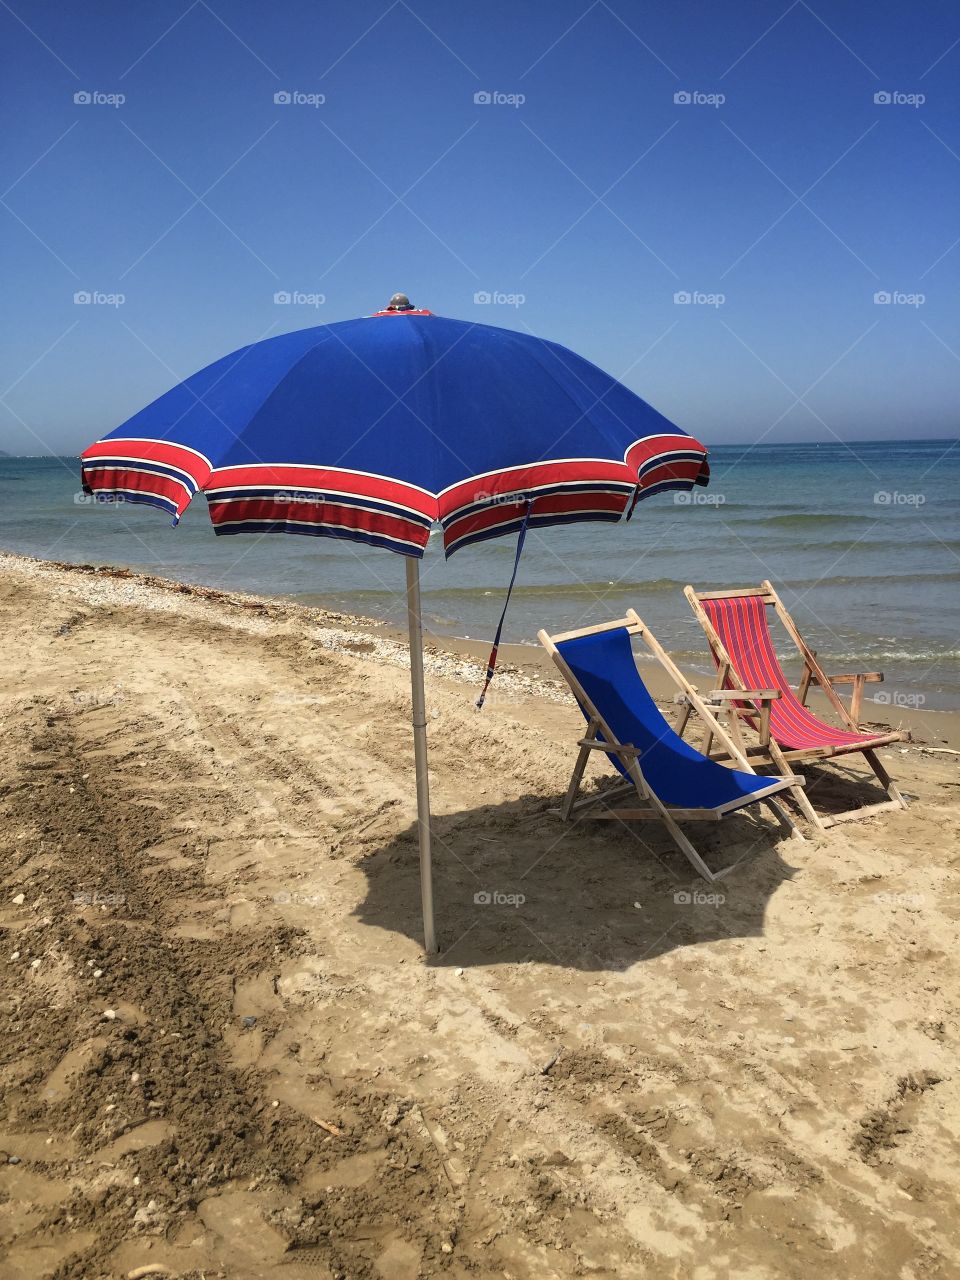 Deck chairs and umbrella on the beach